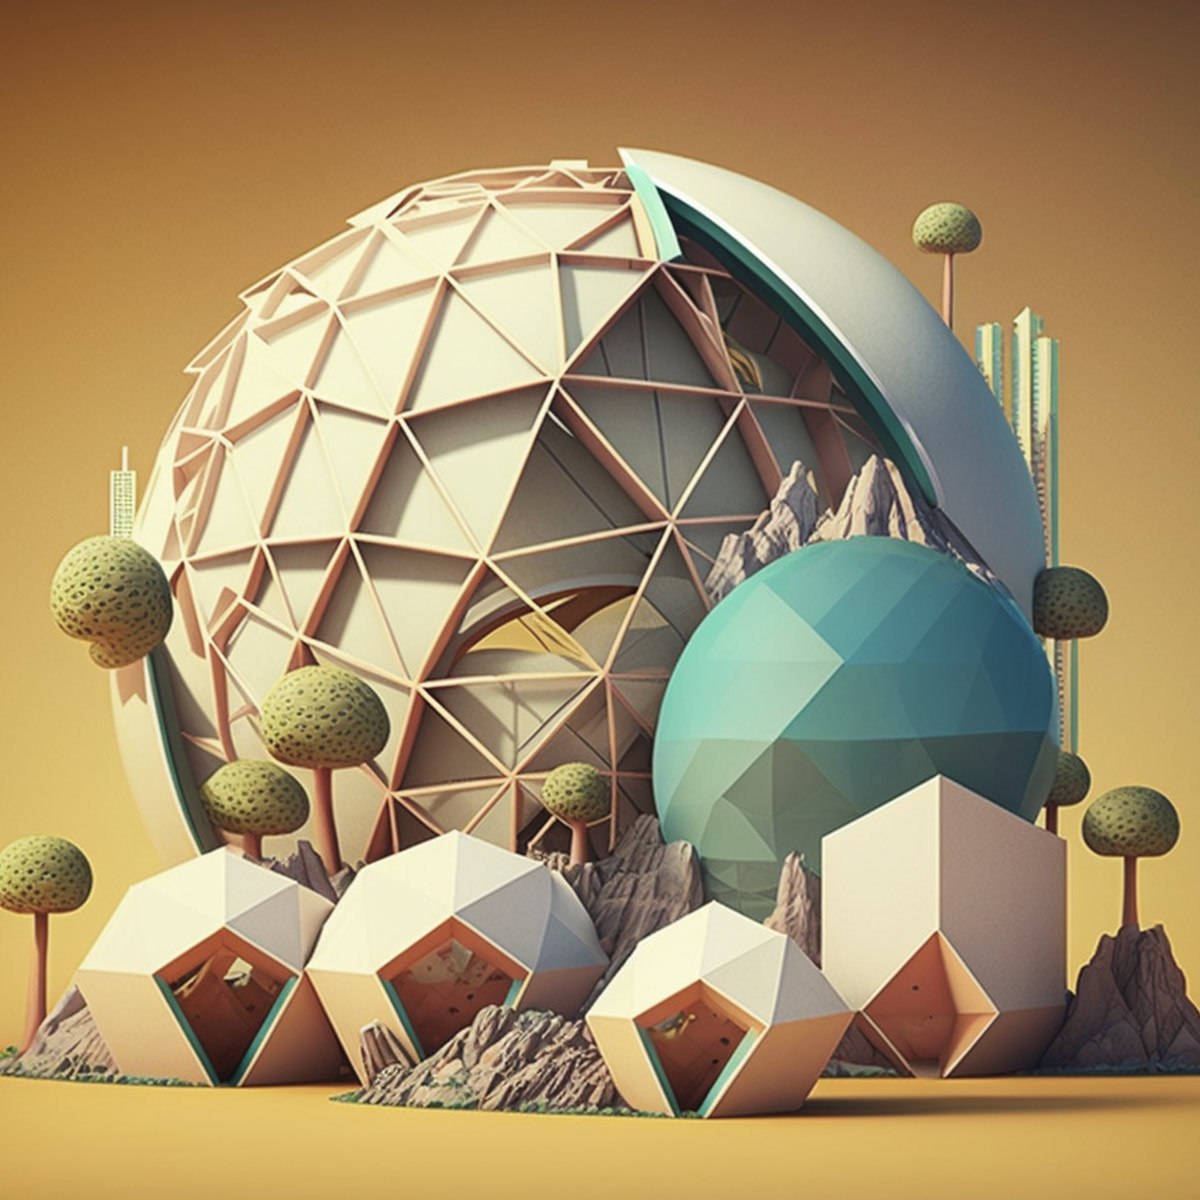 geodesic dome suppliers / builders – worldwide